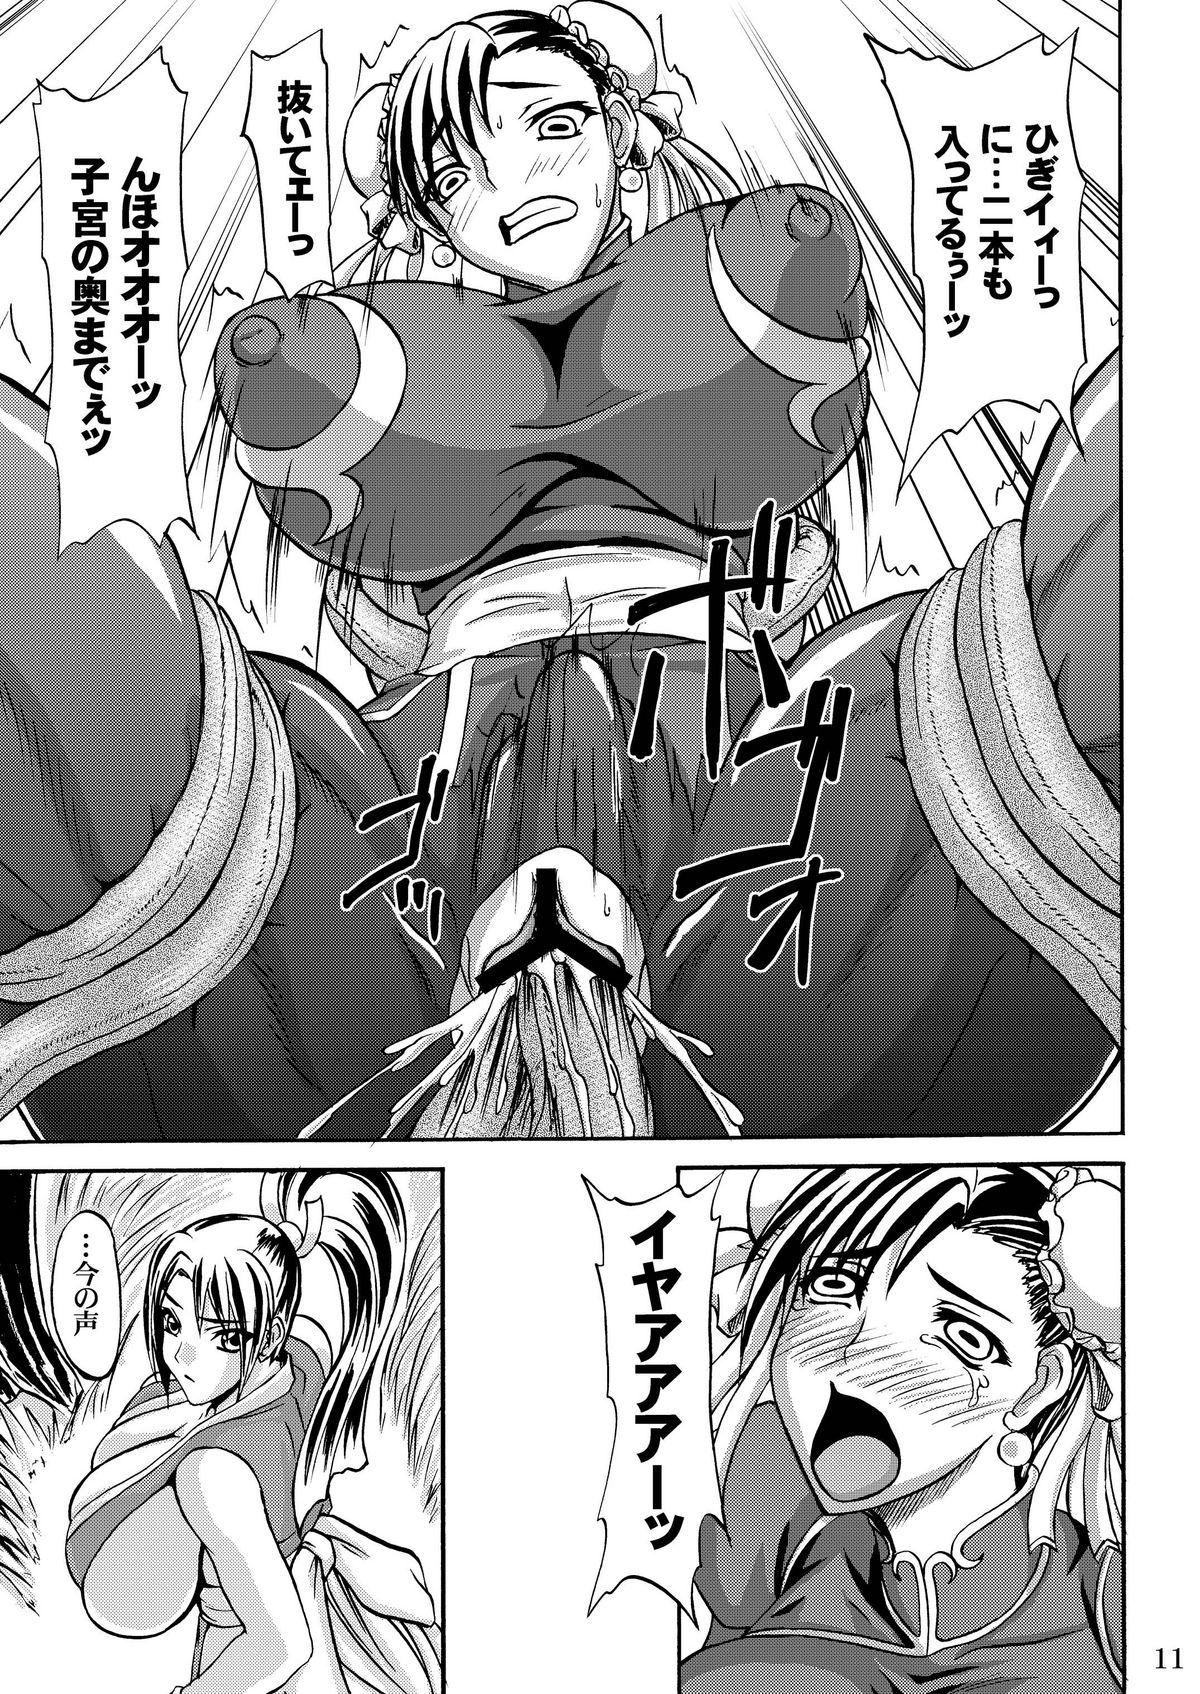 Outside Tamashii no Kyouen - Street fighter King of fighters Soulcalibur Free Rough Sex Porn - Page 11